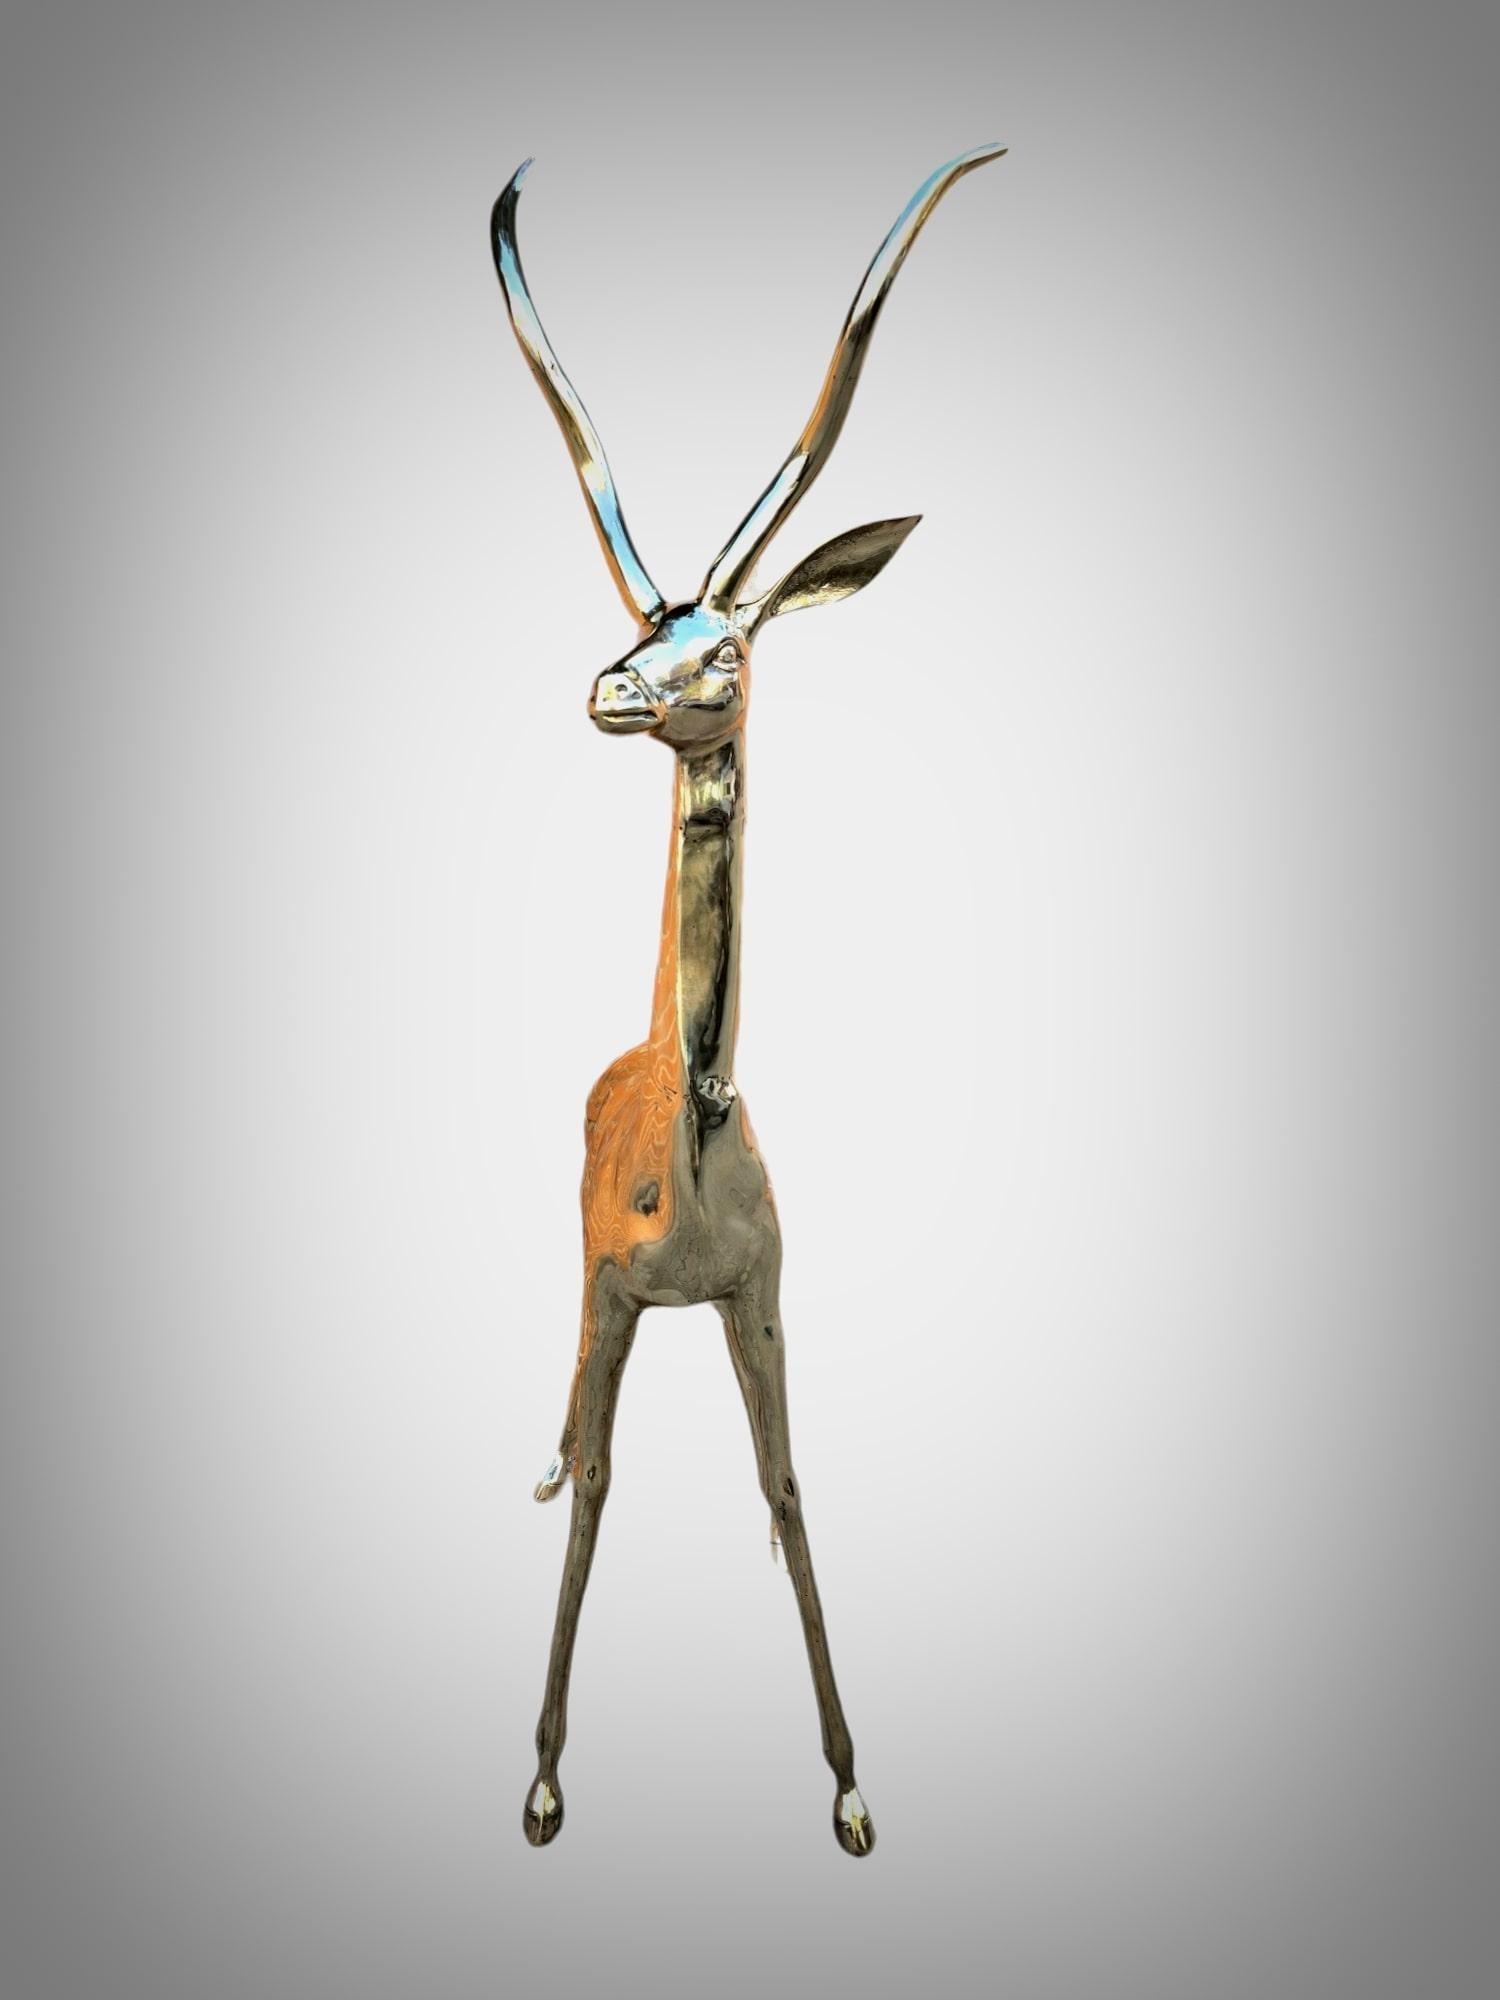 Exquisite Polished Bronze Sculpture: Lifesize Antelope from the 1950s For Sale 11